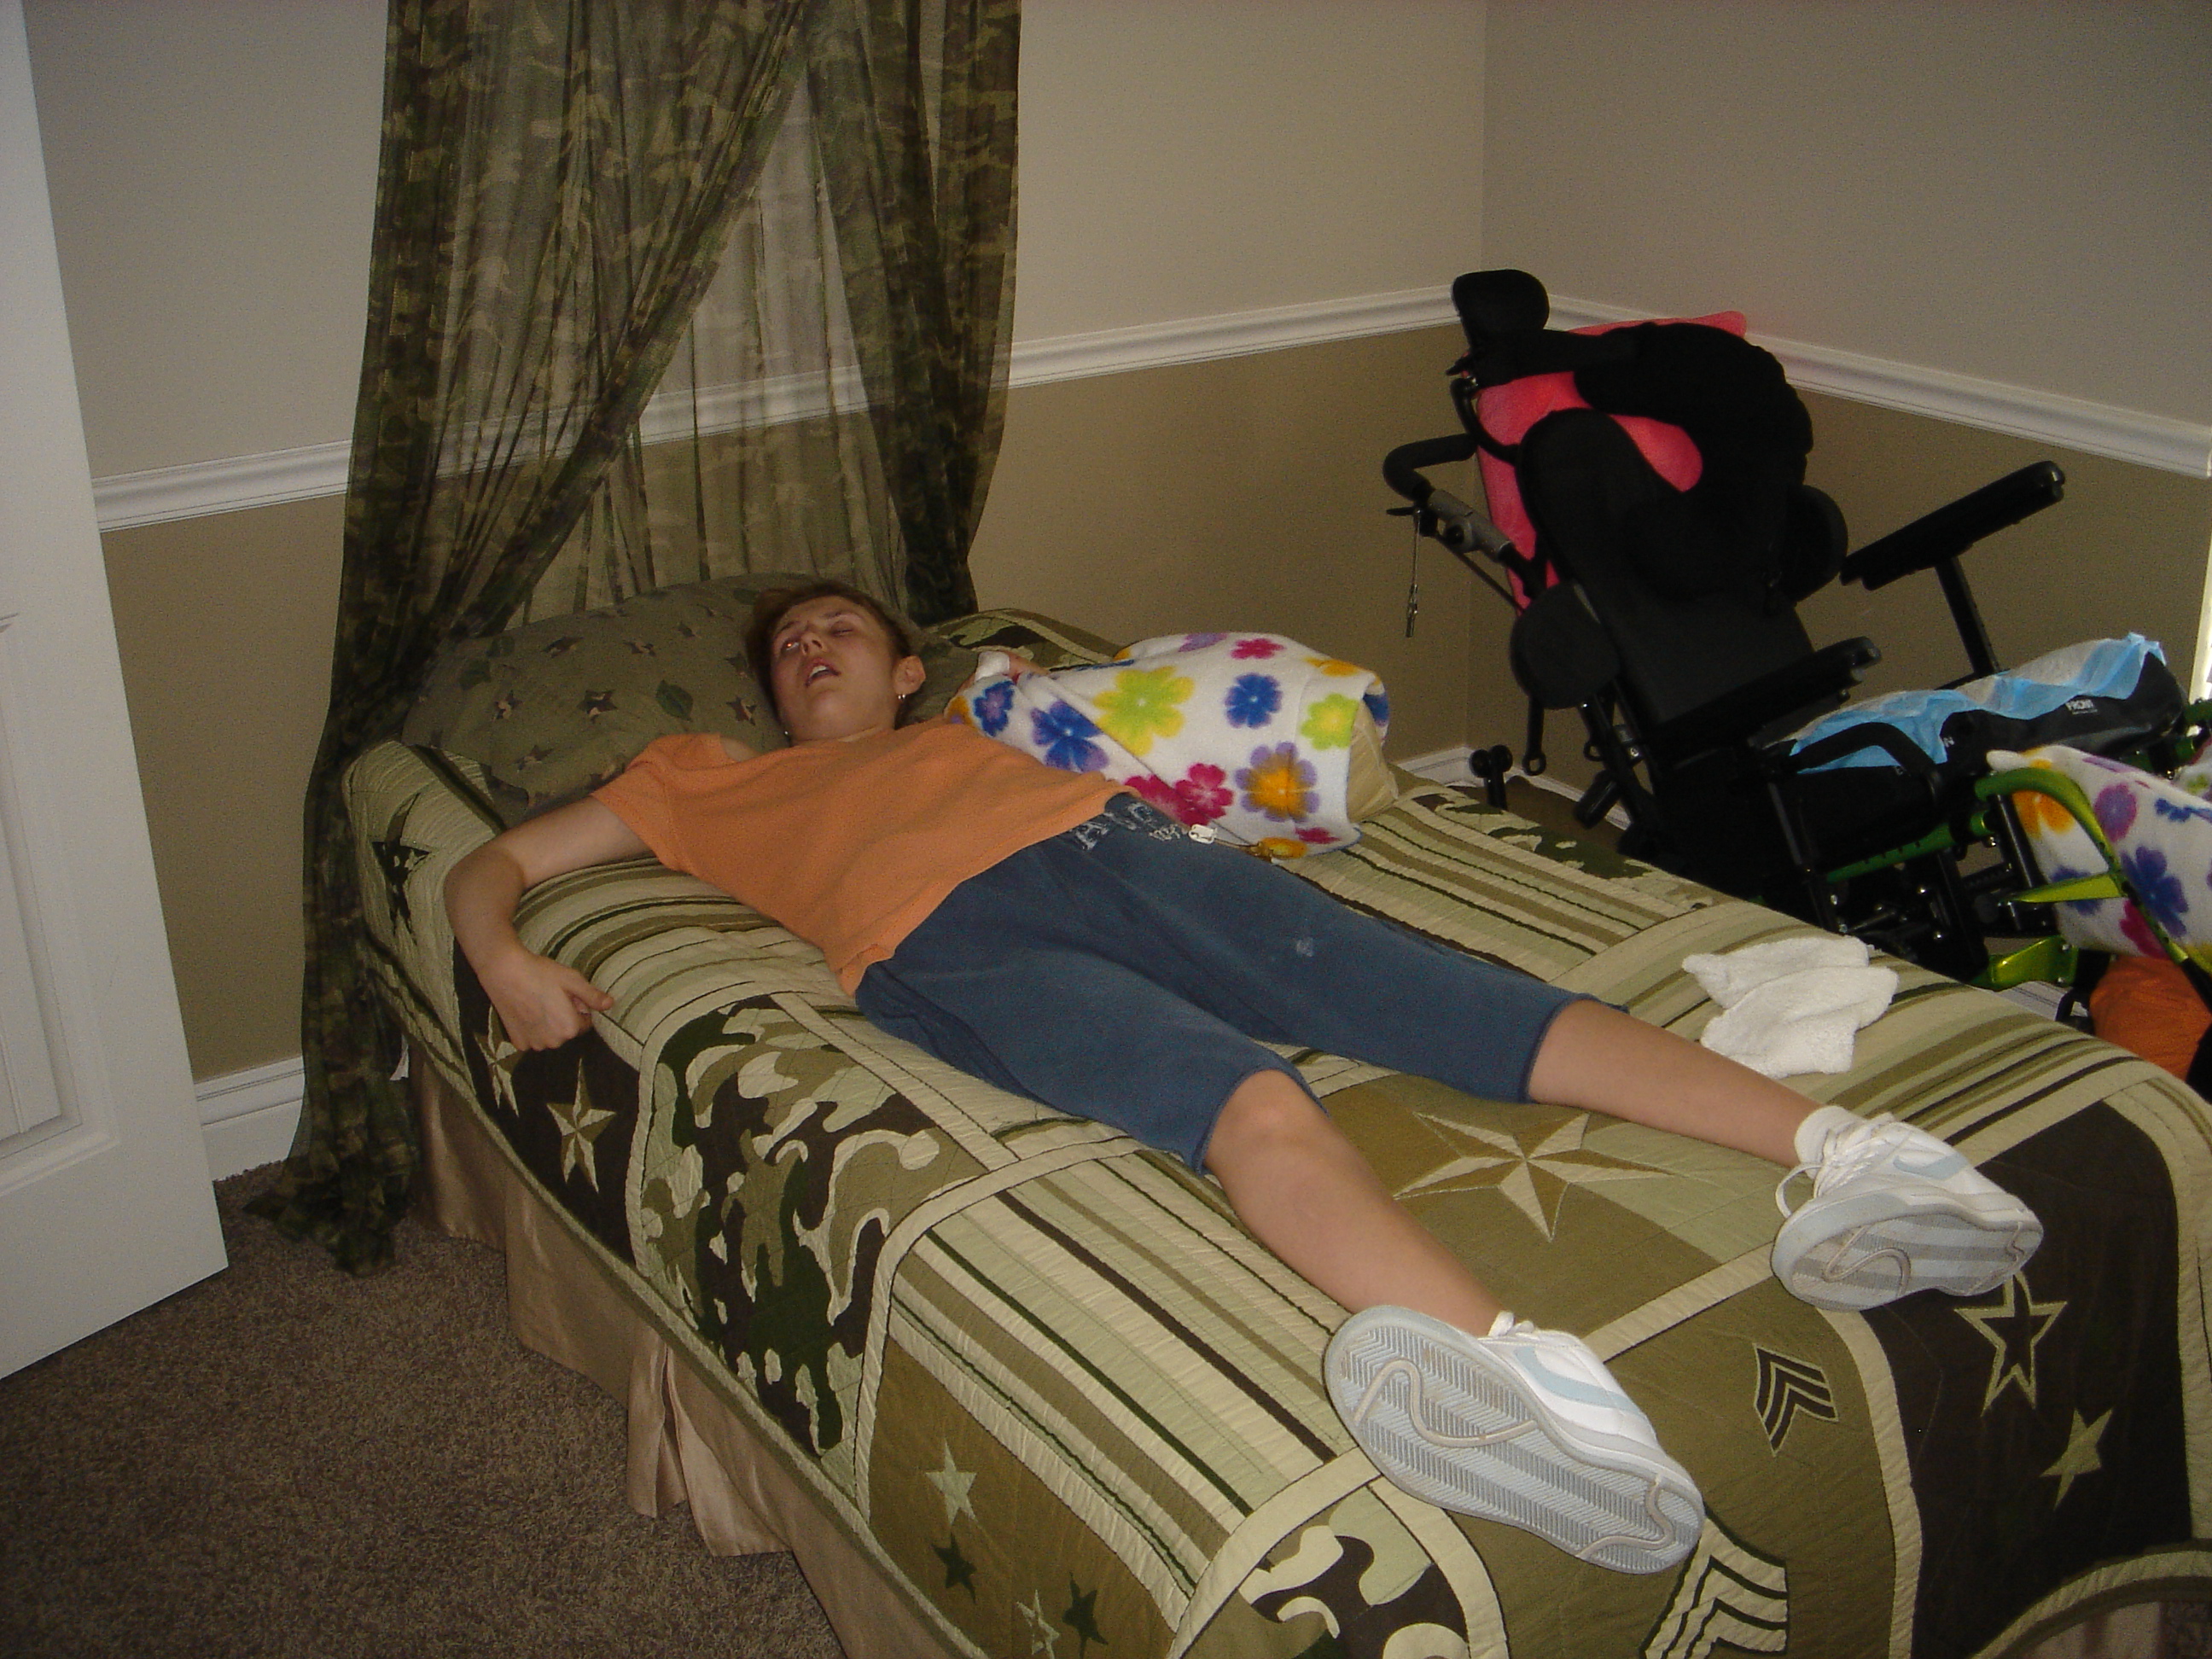 Tori taking a nap in Ryland's bed